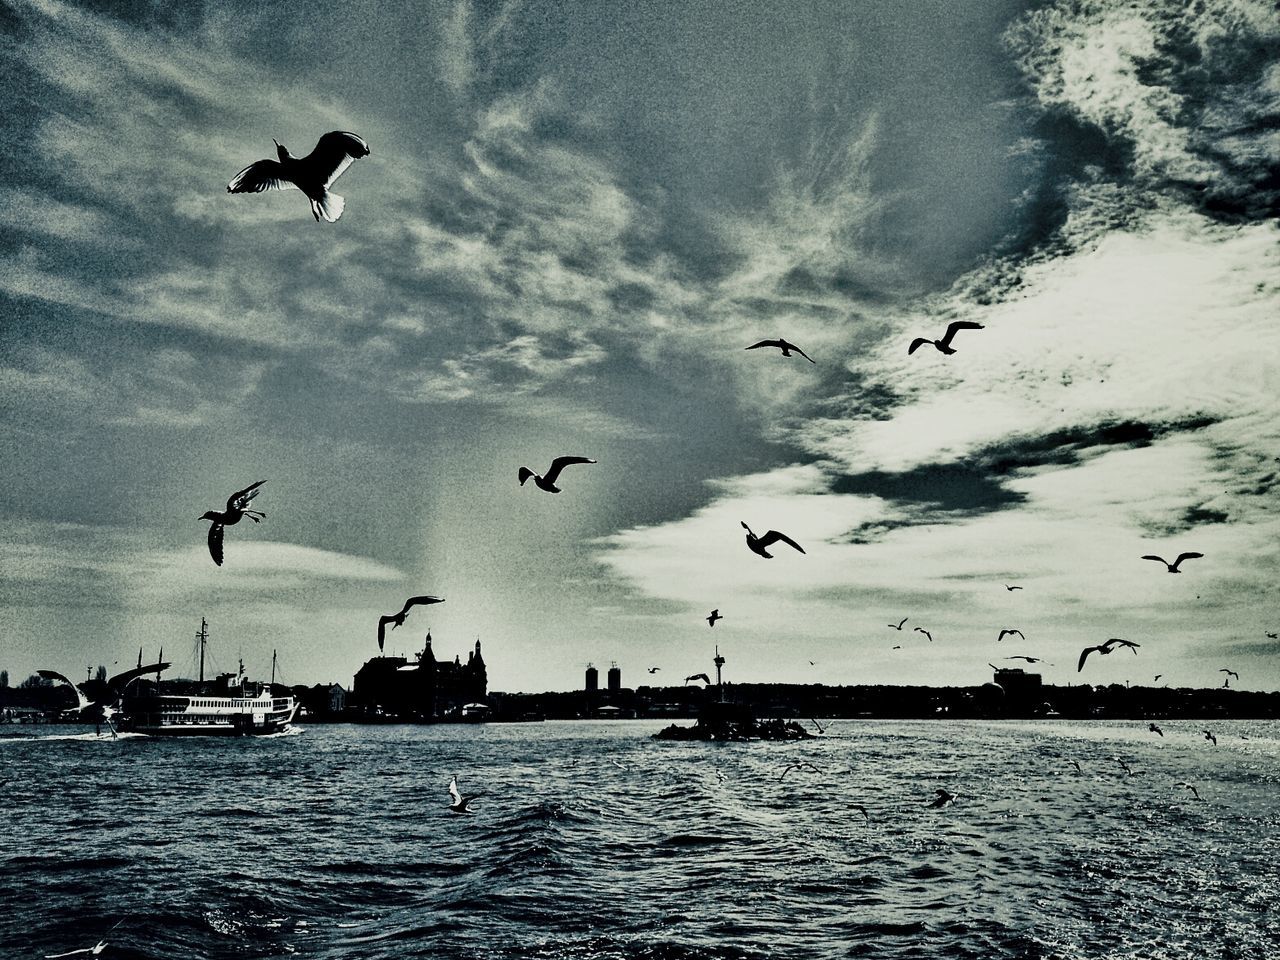 flying, bird, animal themes, animals in the wild, wildlife, water, sky, mid-air, spread wings, cloud - sky, sea, waterfront, flock of birds, medium group of animals, nature, transportation, silhouette, cloudy, seagull